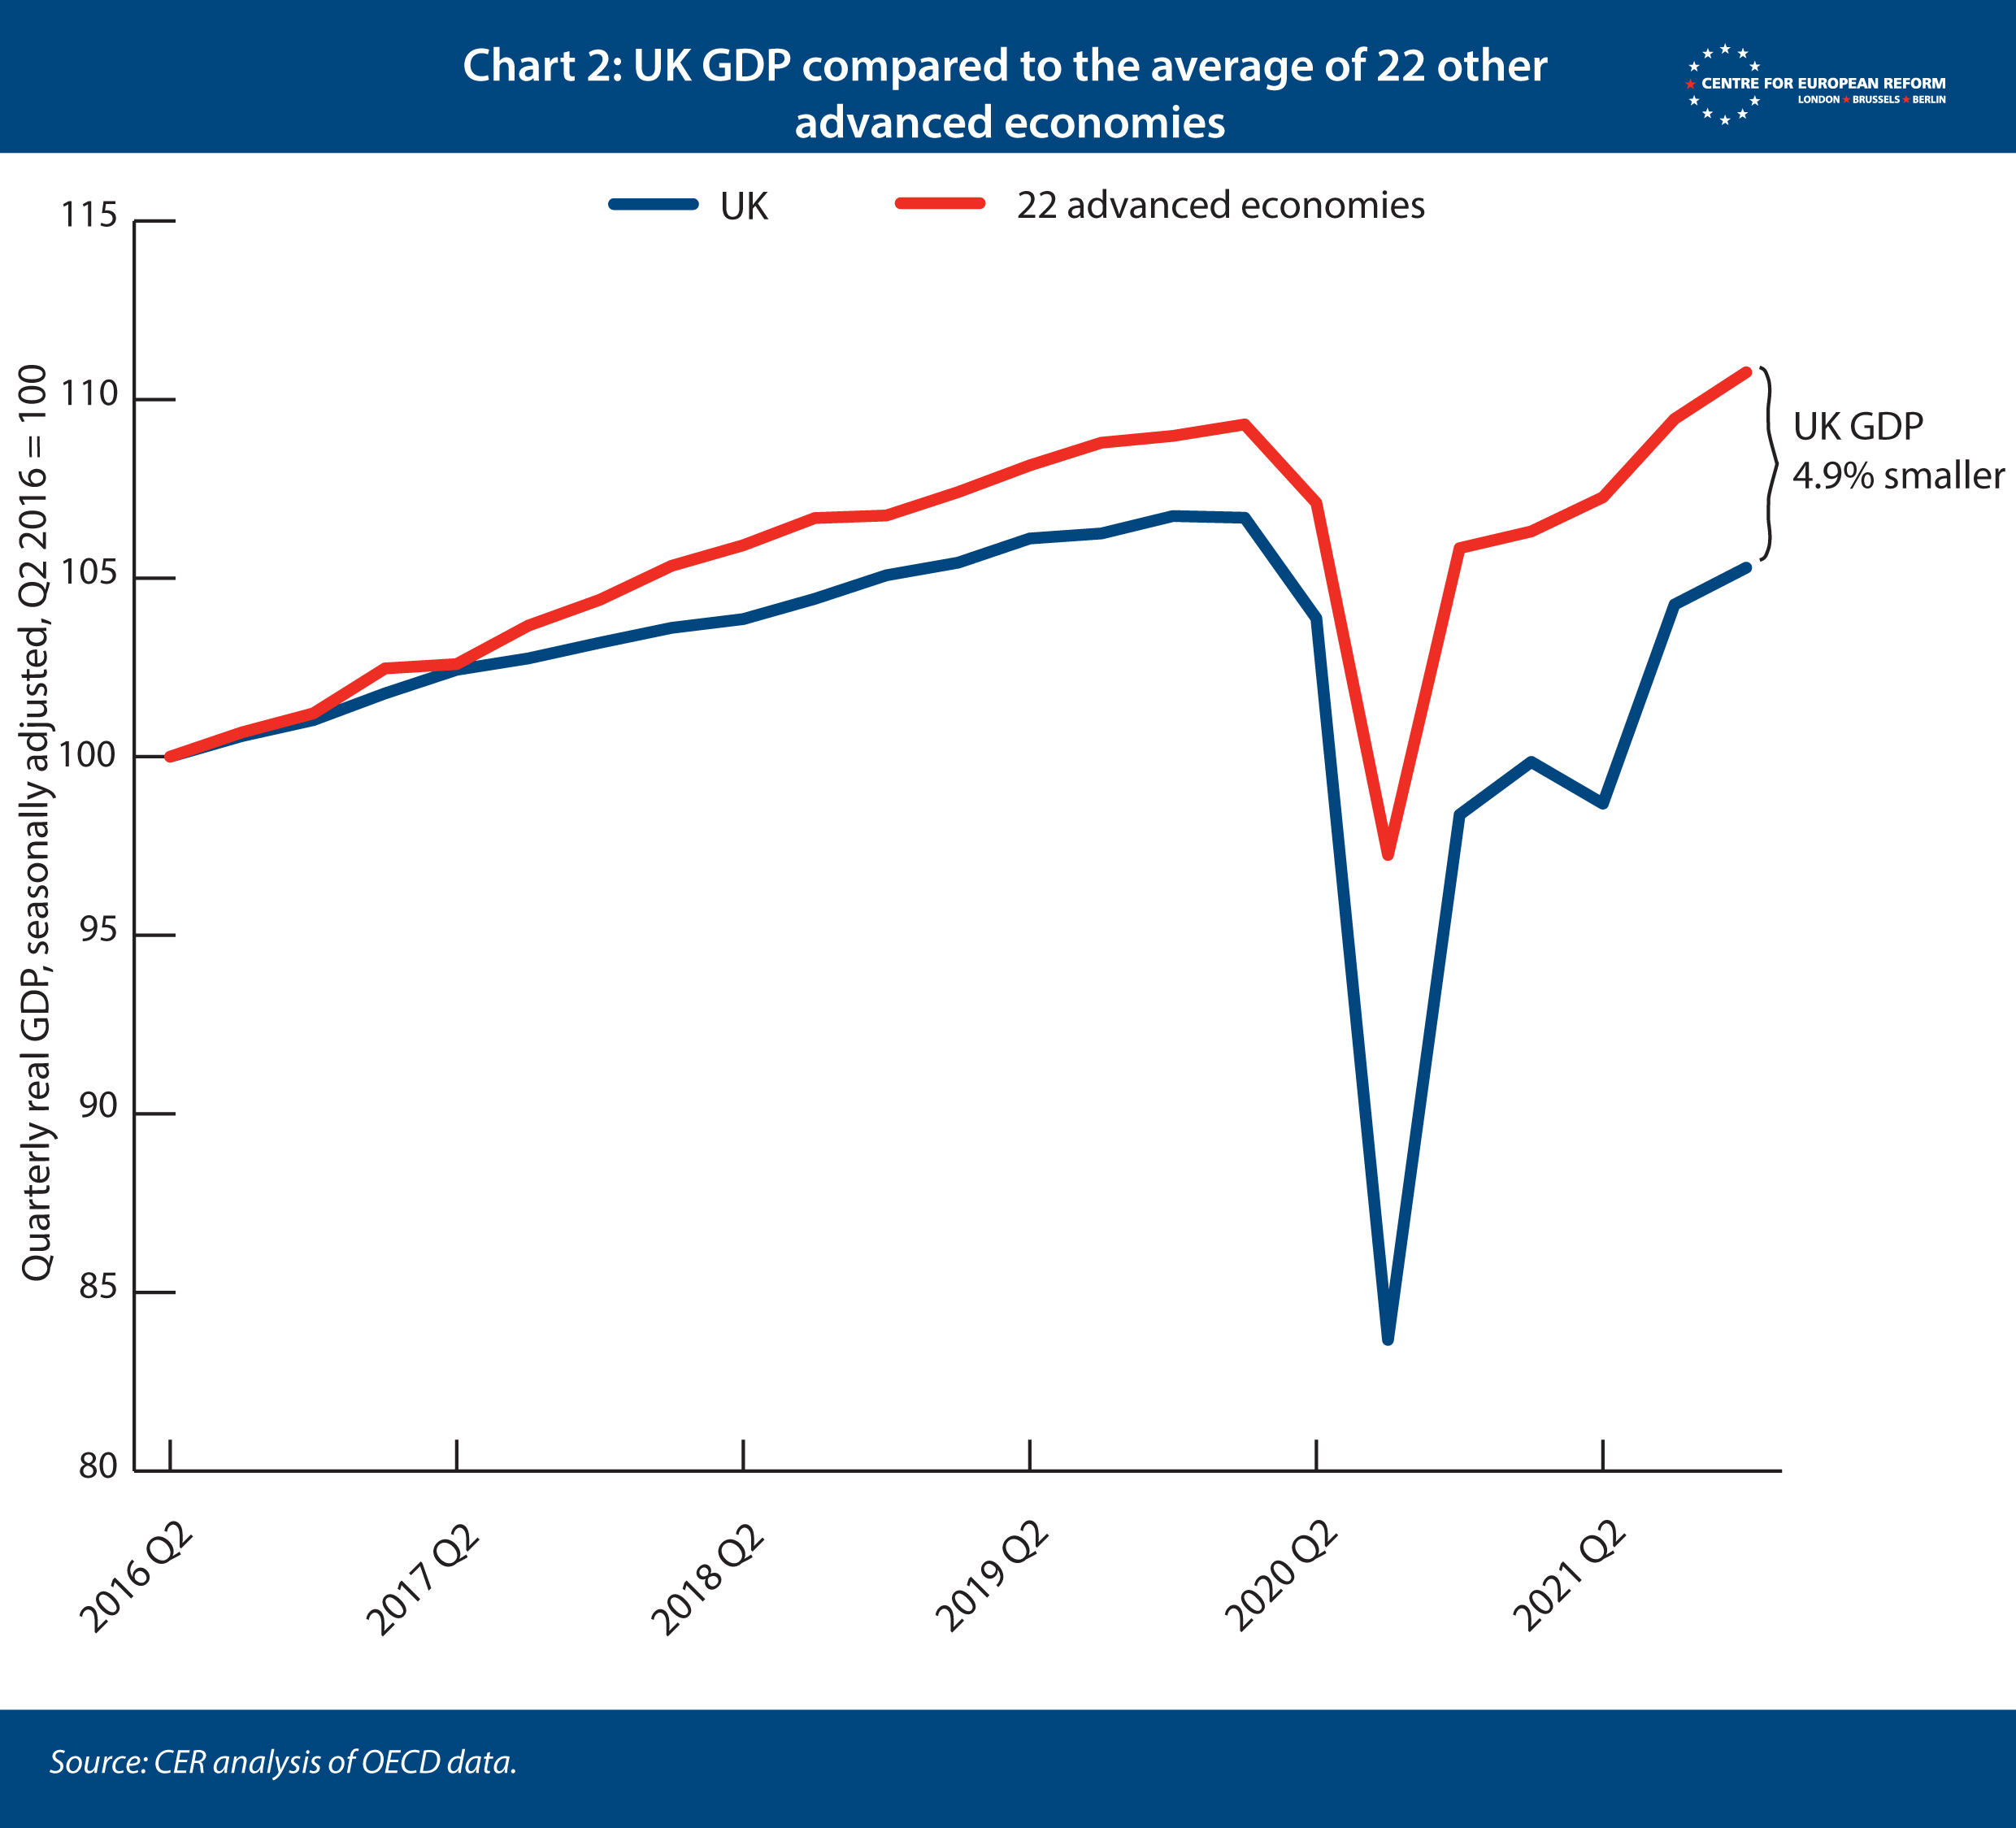 UK GDP compared with the average of 22 other advanced economies